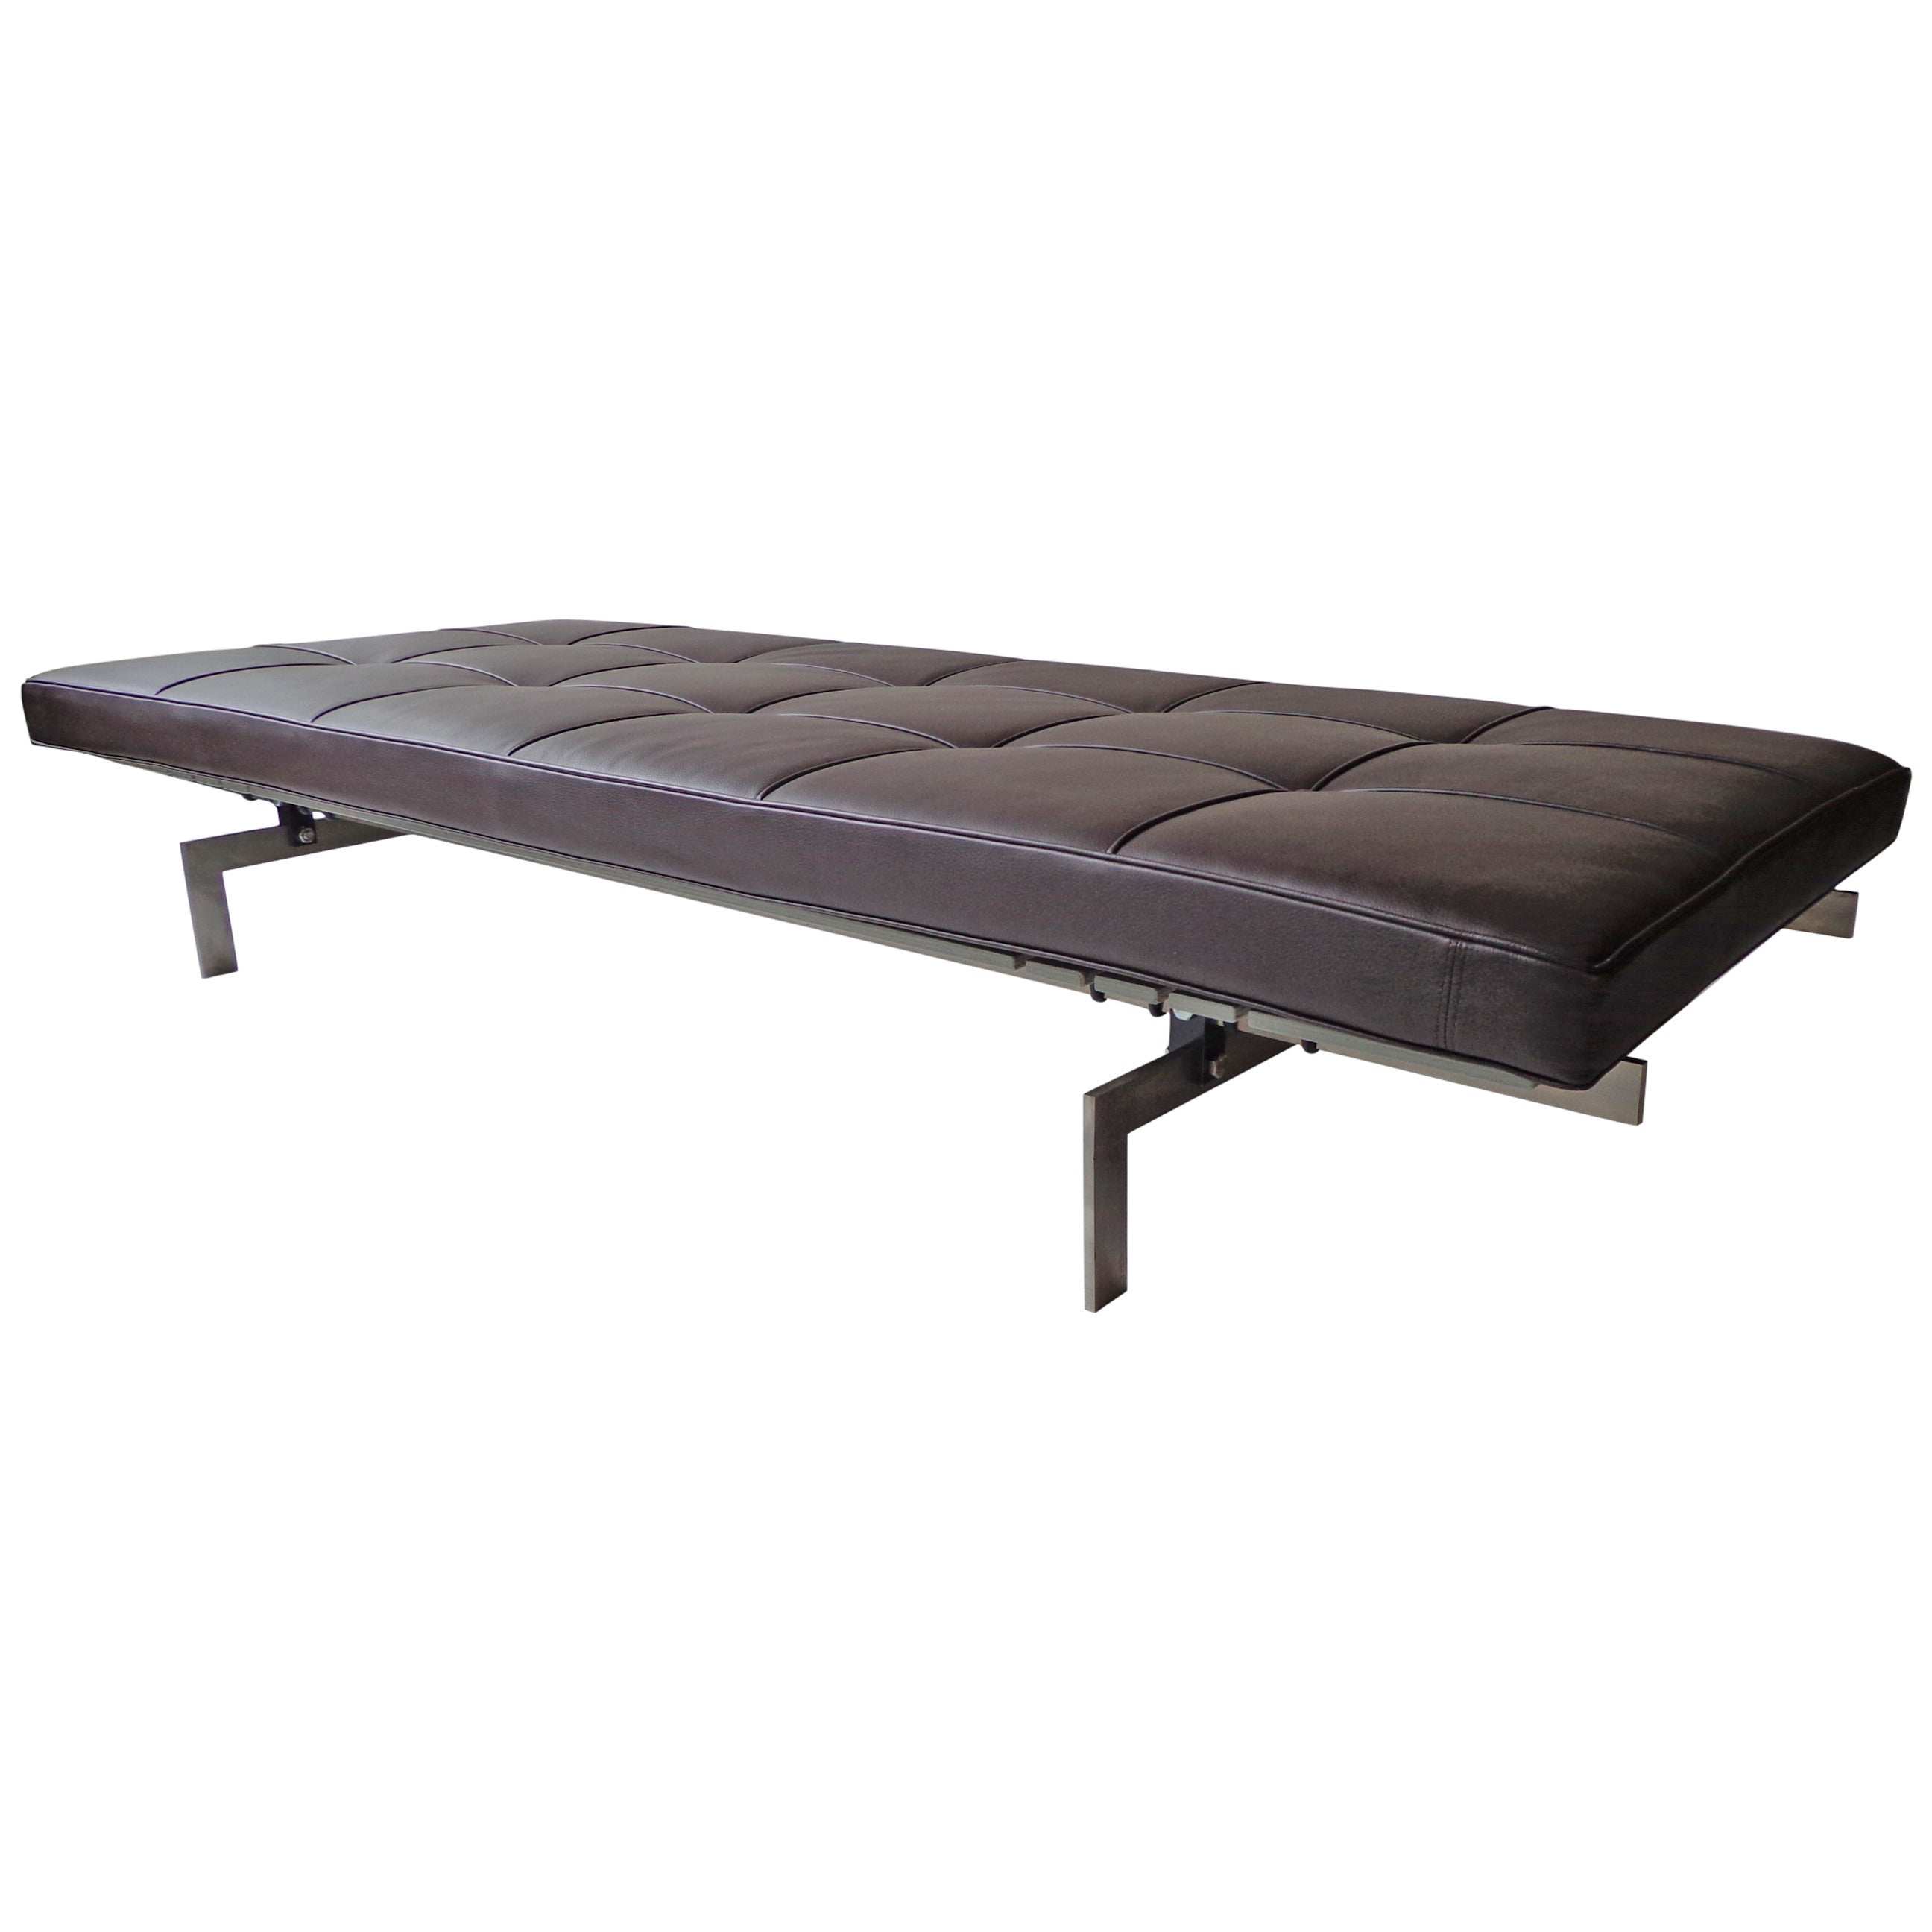 PK 80 Daybed by Poul Kjaerholm in Dark Brown Leather by E. Kold Christensen